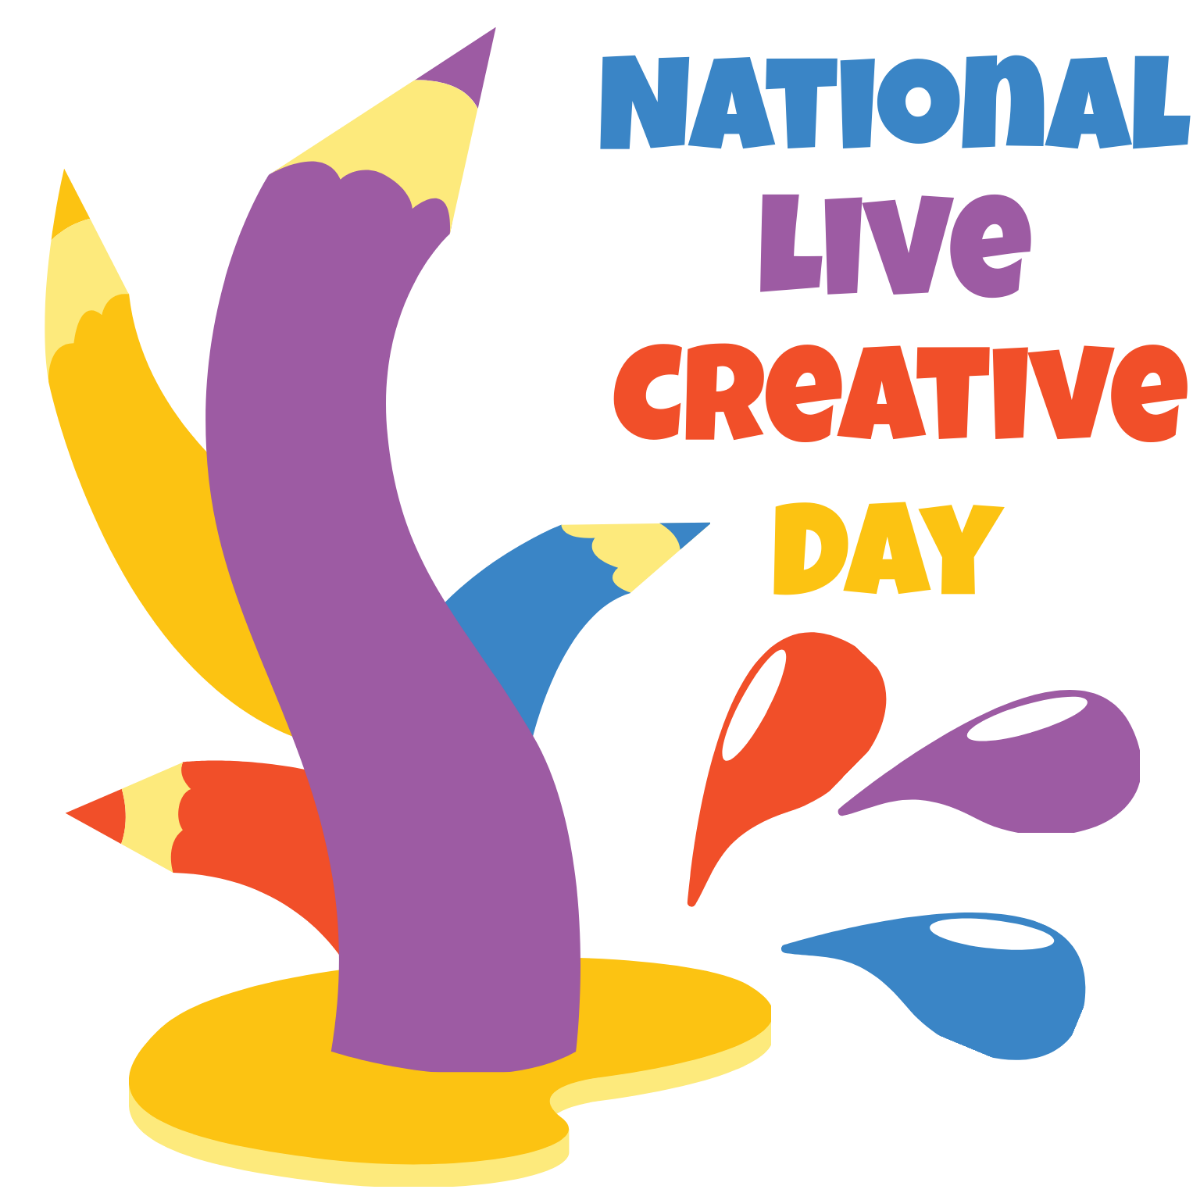 National Live Creative Day Clipart Vector